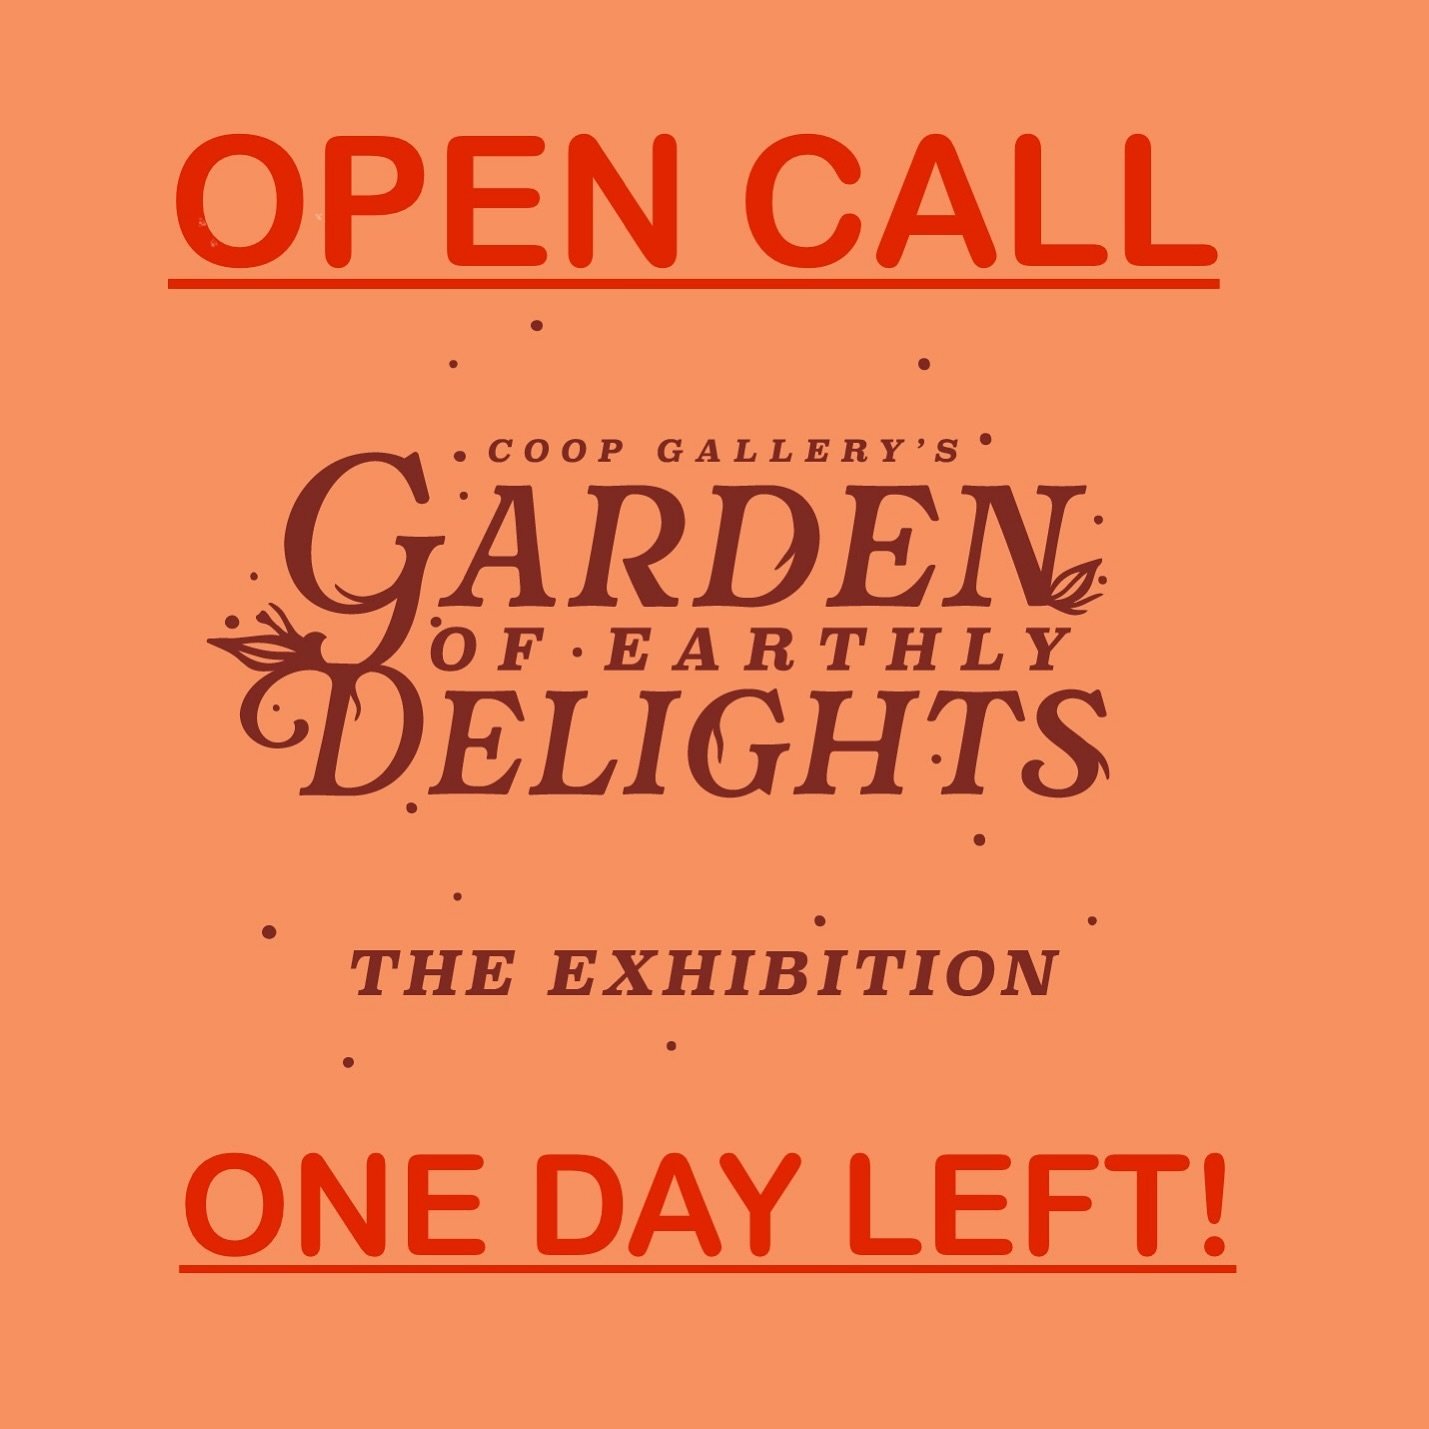 🍃OPEN CALL🍃 Apply today to be in COOP Gallery&rsquo;s Garden of Earthly Delights: The Exhibition Group Show! Today is the final day to apply! Deadline April 17th!